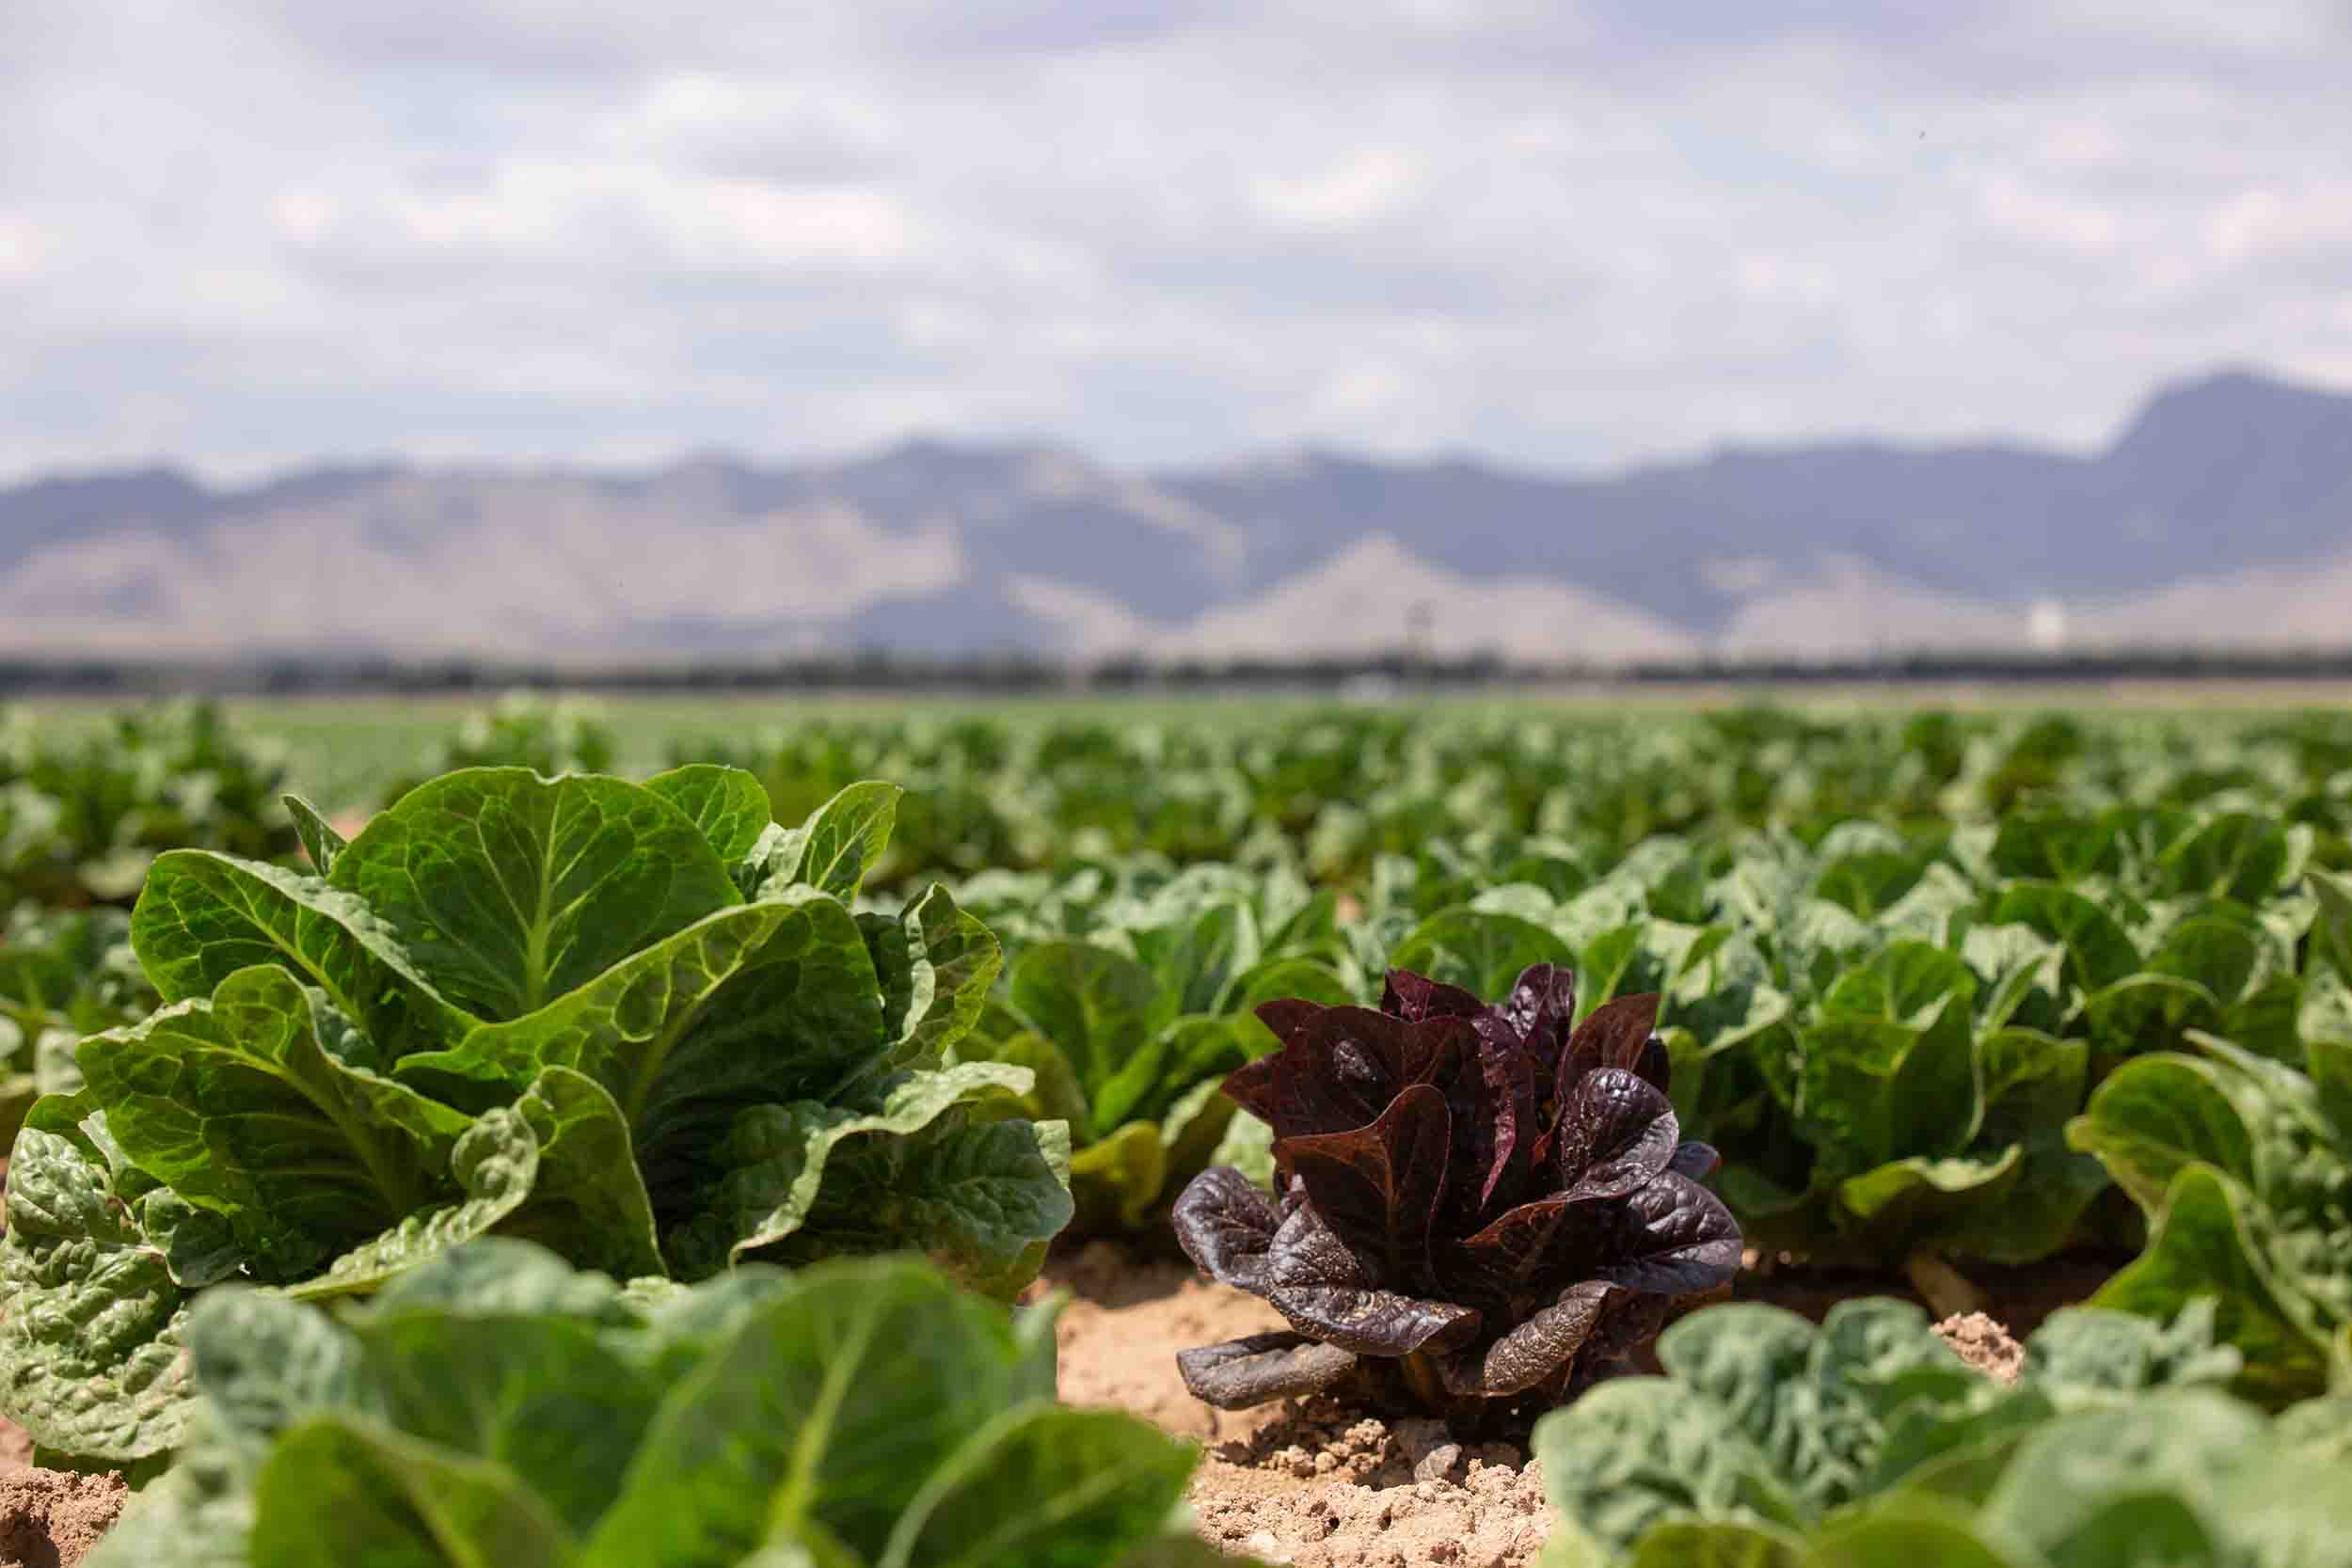 Lettuce plants grow in a field with mountains in the background